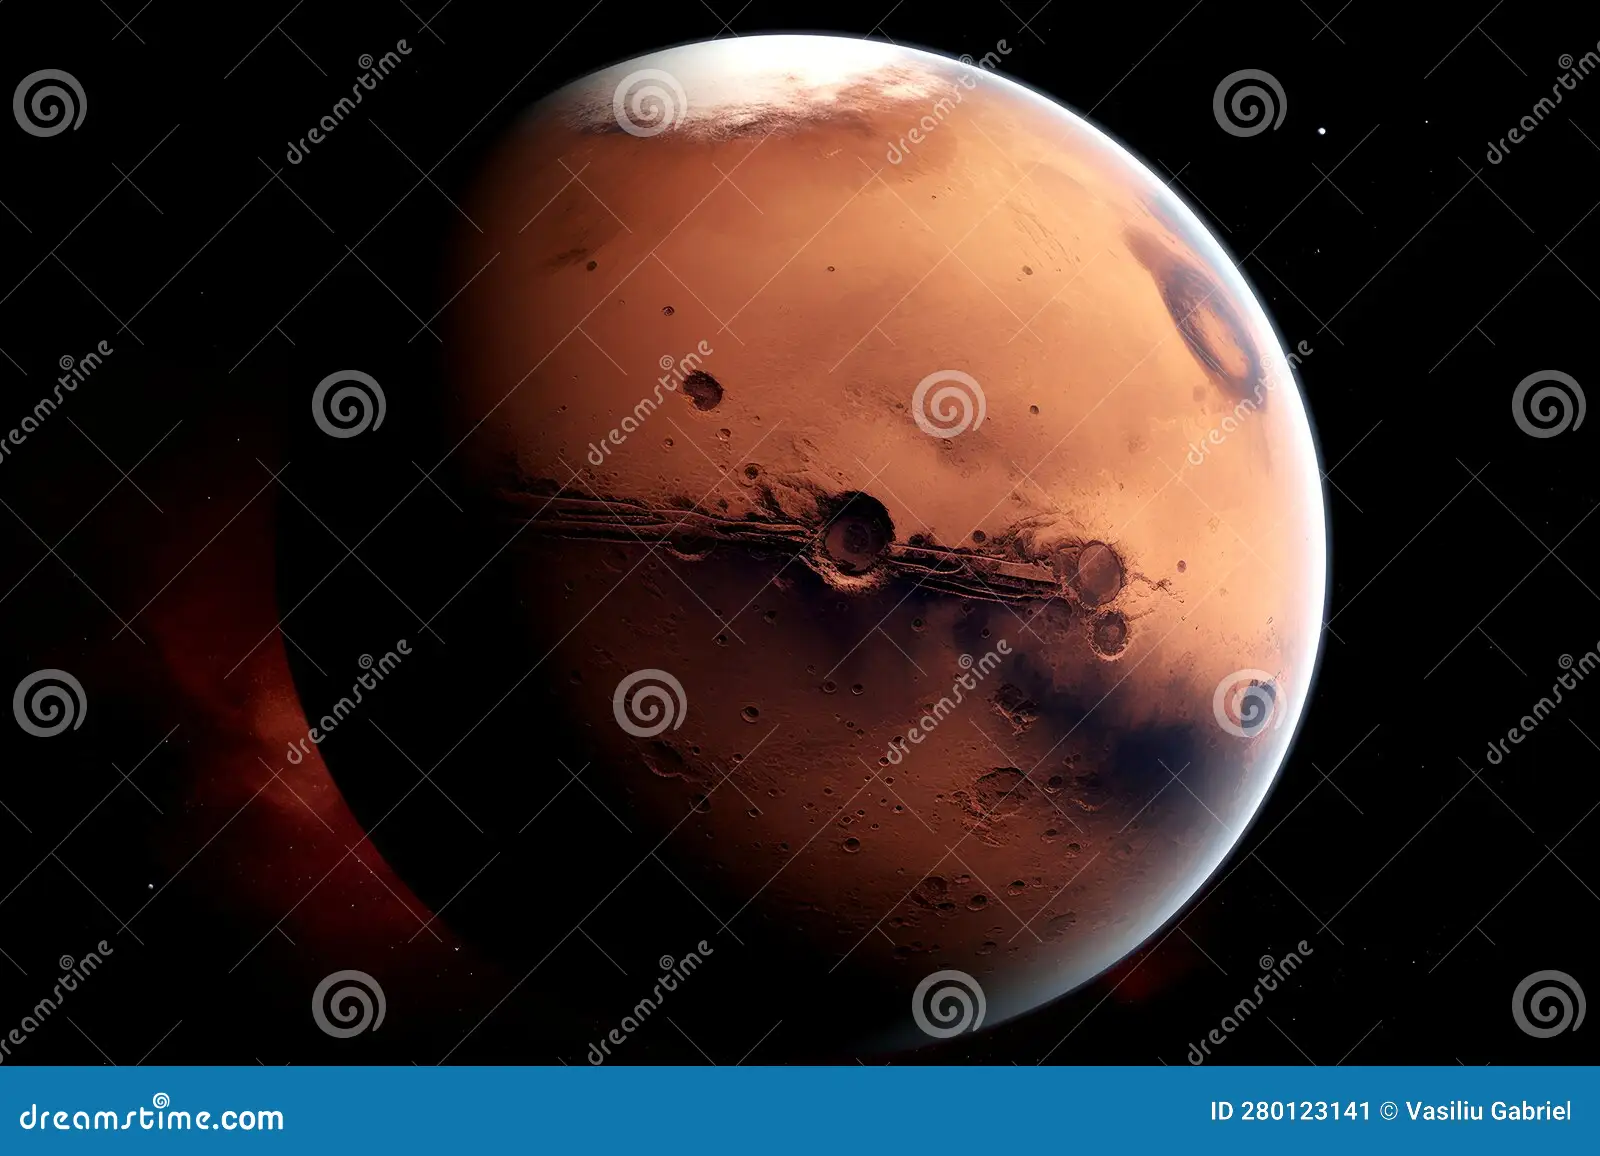 The red planet and utopia, astral concept wallpaper